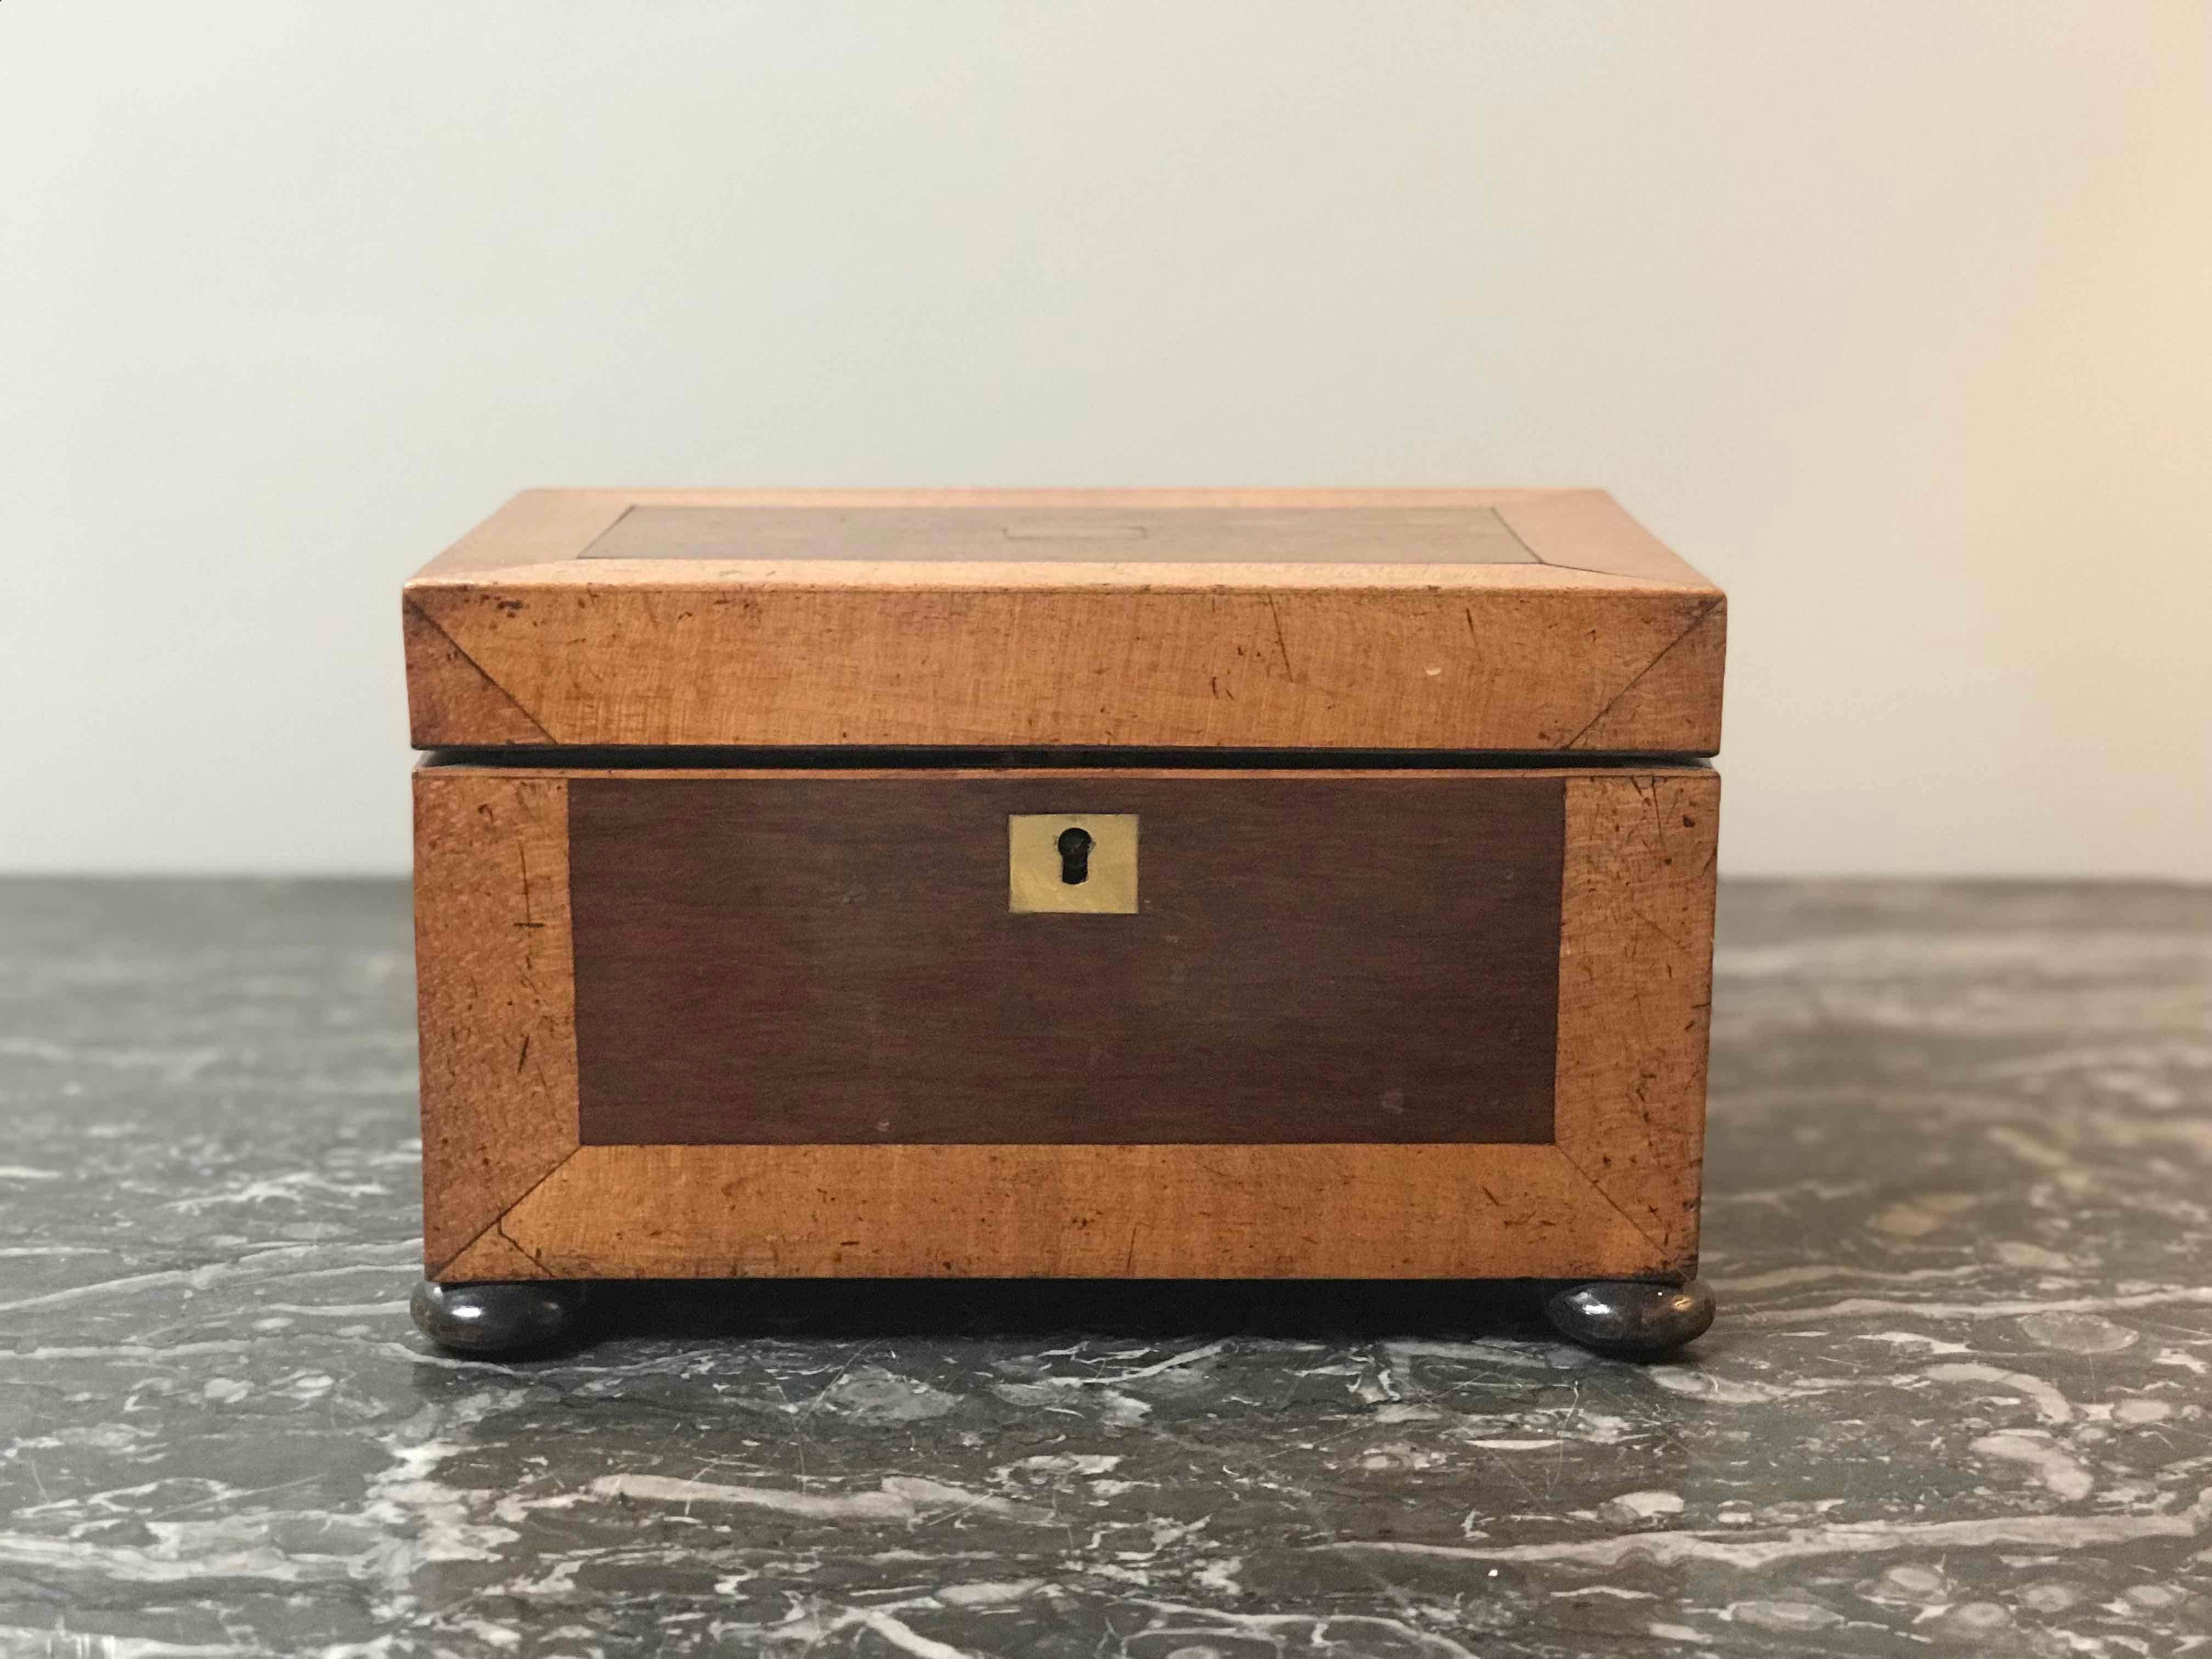 Boxwood tea caddy from early 19th century England. 